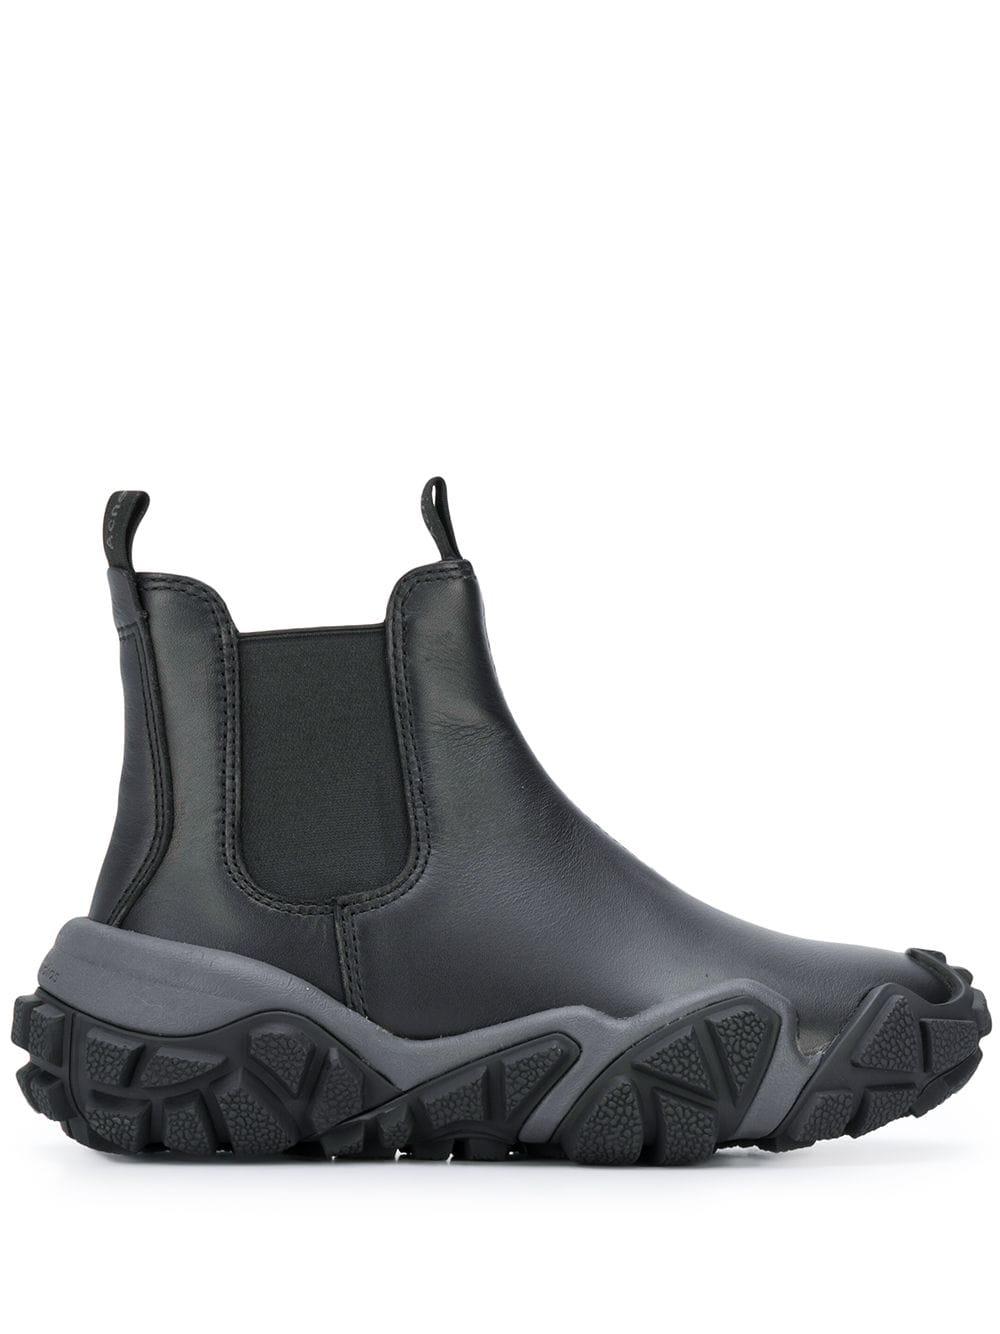 Acne Studios Leather Bolzter Chelsea Boots in Black - Lyst